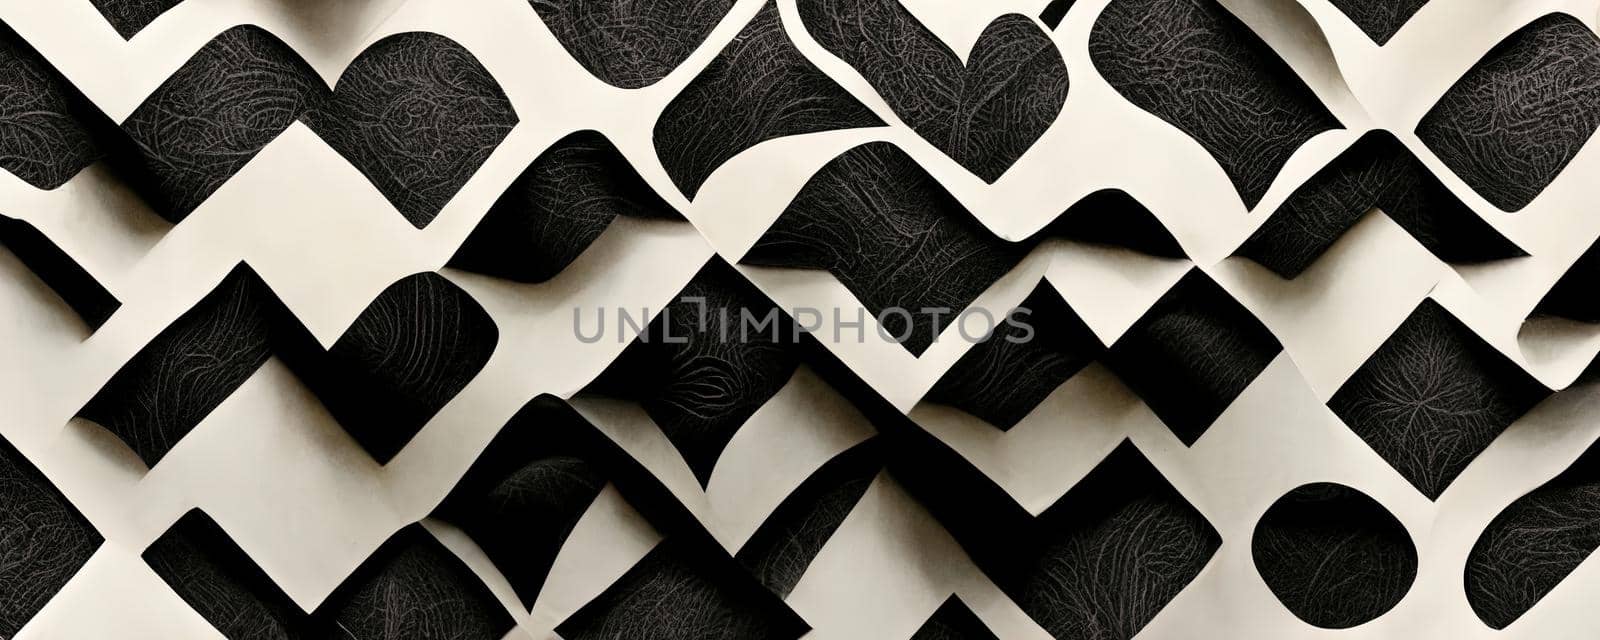 black and white background imitating cut paper by TRMK